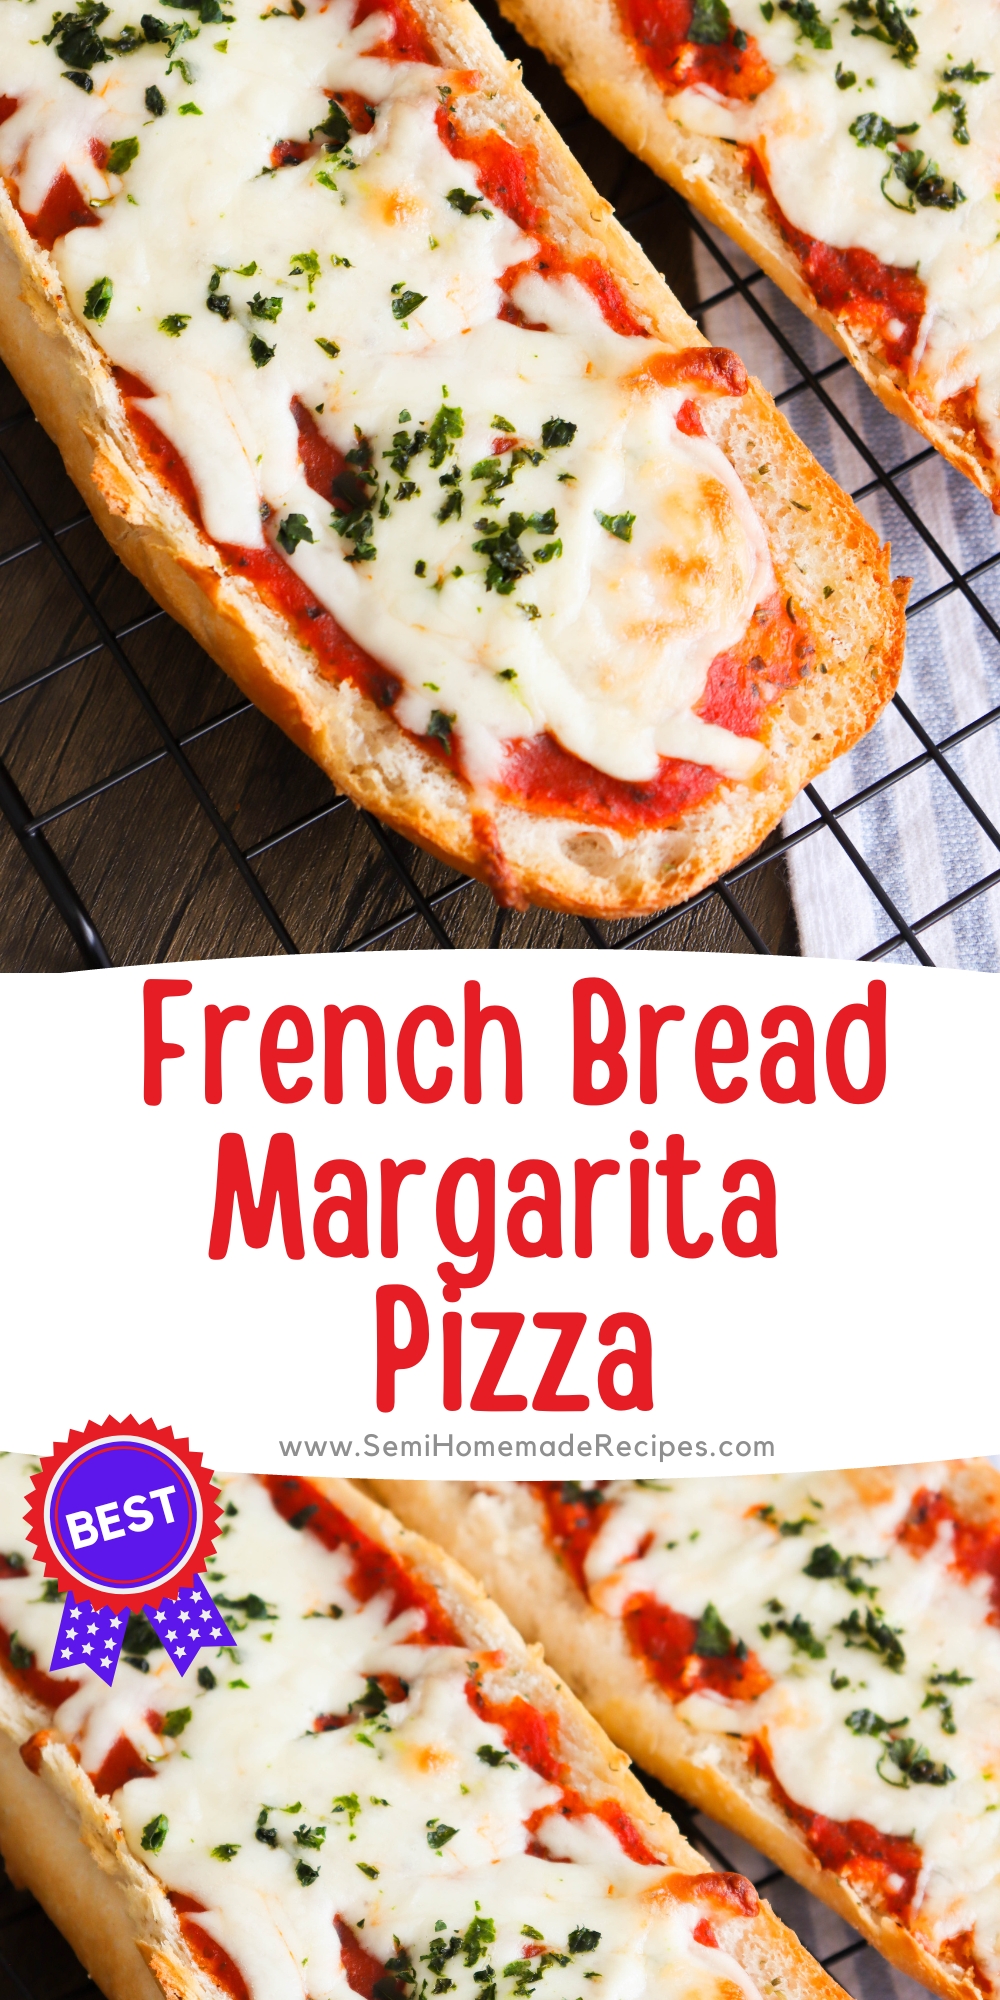 Are you tired of the same old pizza? Switch it up with French Bread Margarita Pizza! This fun semi-homemade twist on a classic dish uses French bread (or Italian bread) instead of traditional pizza dough. You'll love how easy this recipe is and how fun it is to make with kids!